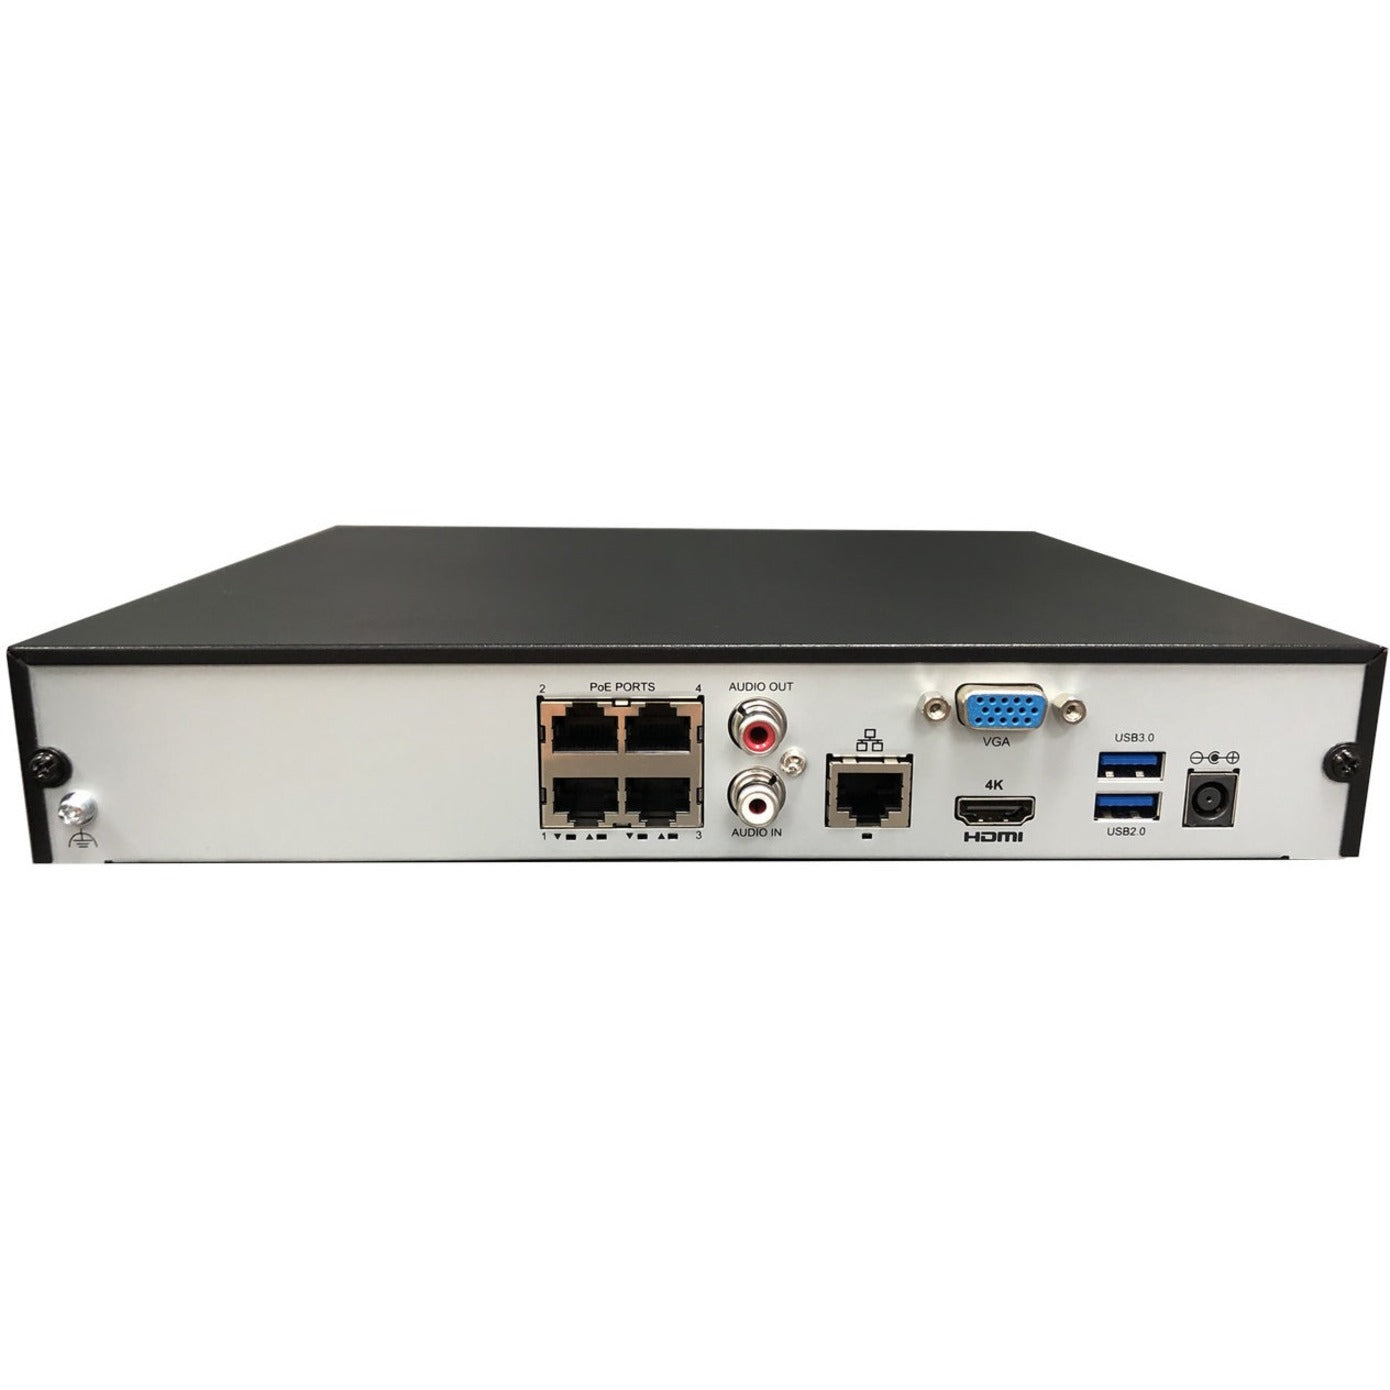 Gyration CYBERVIEW N4-TAA-4TB 4-Channel Network Video Recorder With PoE, TAA-Compliant, 4TB HDD